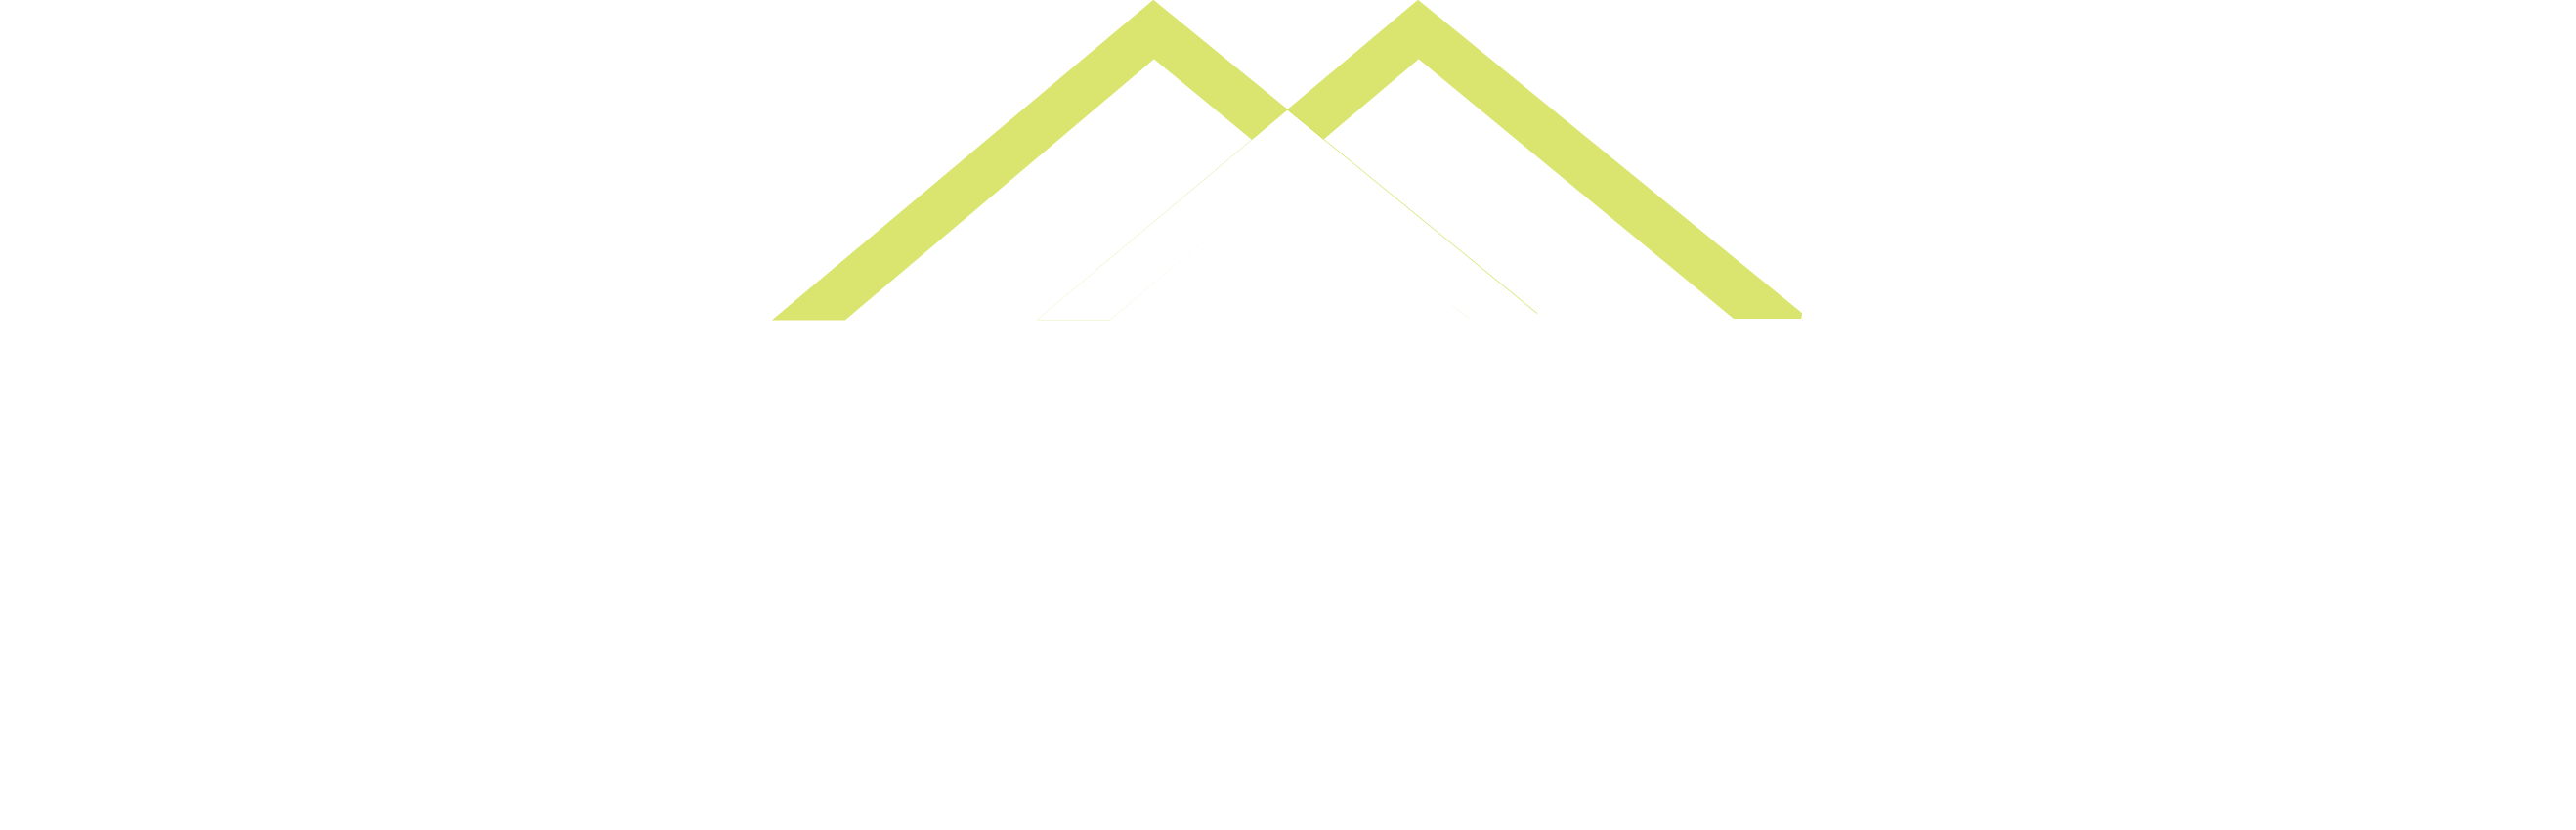 Cache Real Estate Logo - Latest Real Estate News Category - Bend Homes & Real Estate